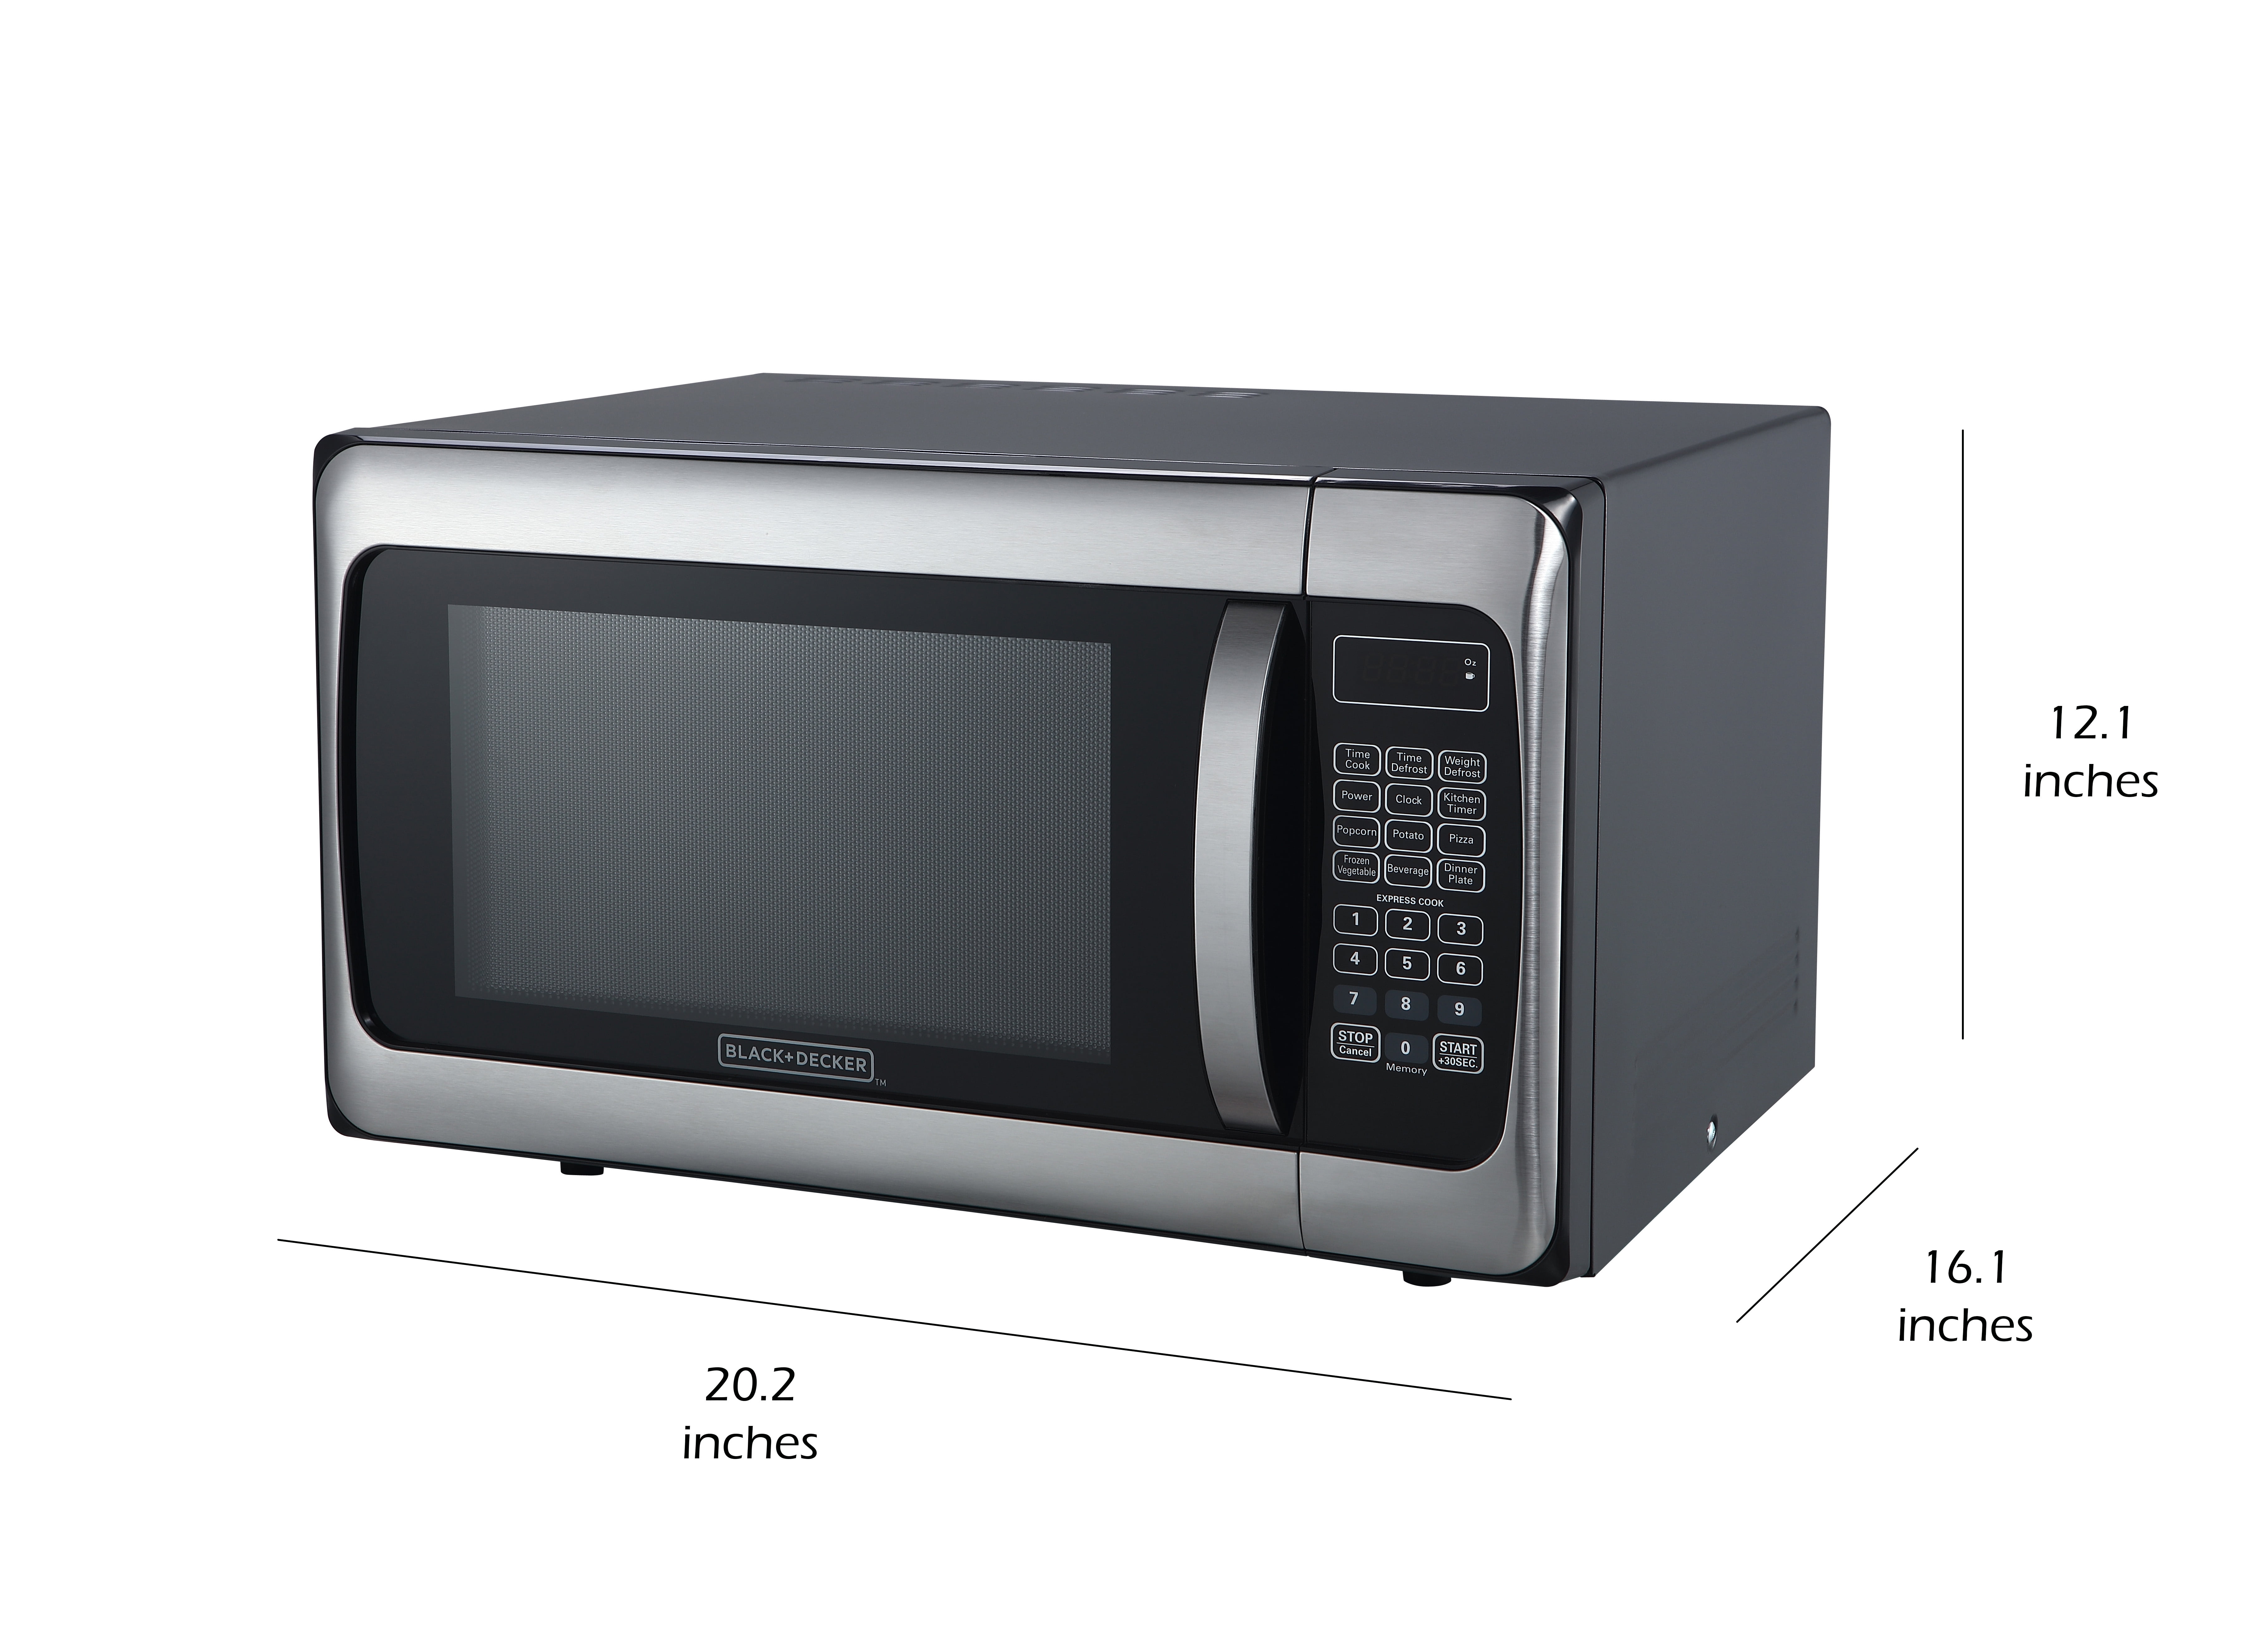 BLACK+DECKER 1.1 Cu. Ft. 1000W Microwave Oven, Black/Stainless